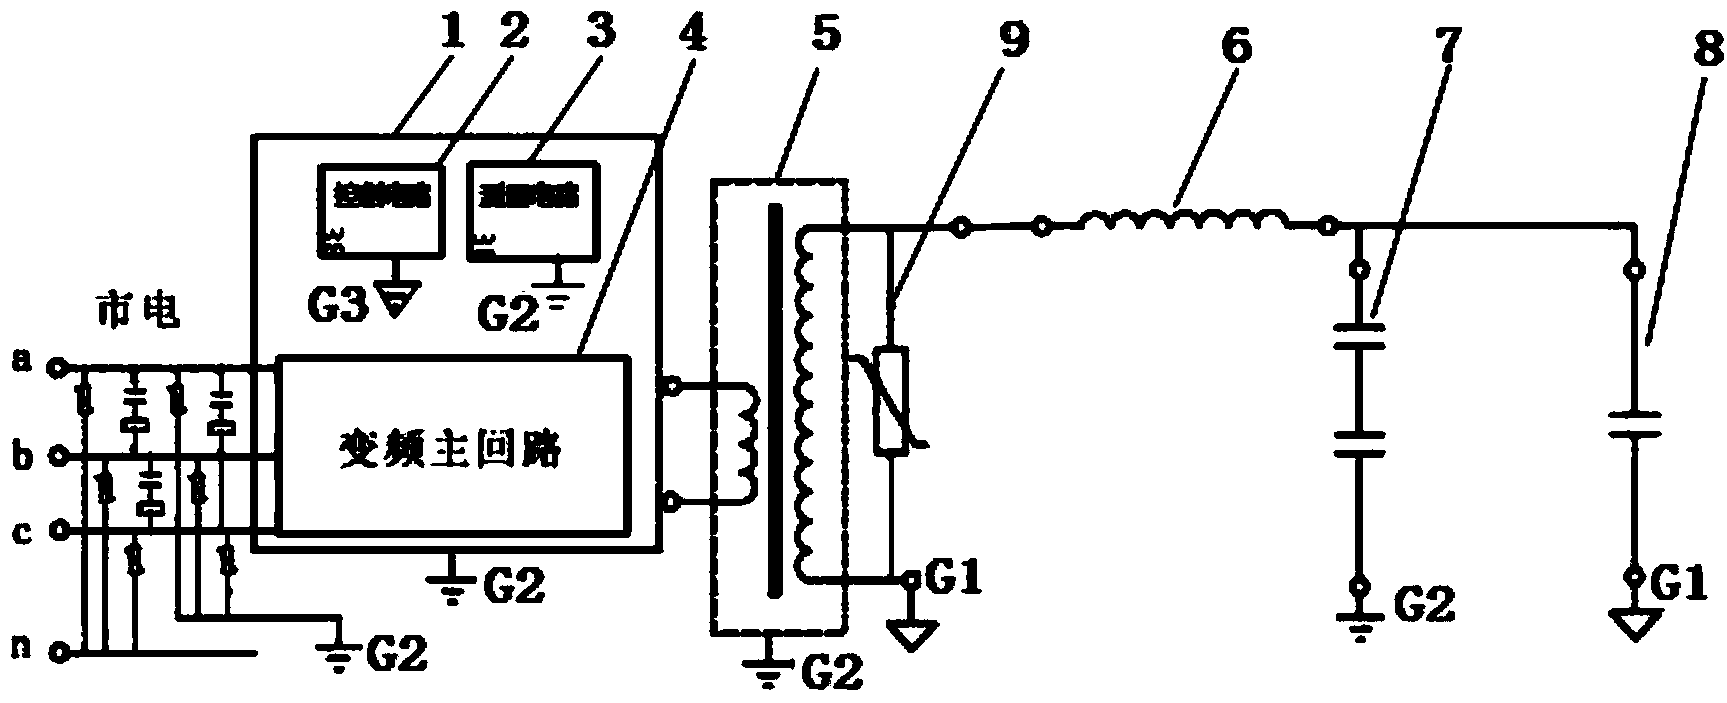 Protection connection structure for preventing components in variable frequency power cabinet from flashover impact of tested object